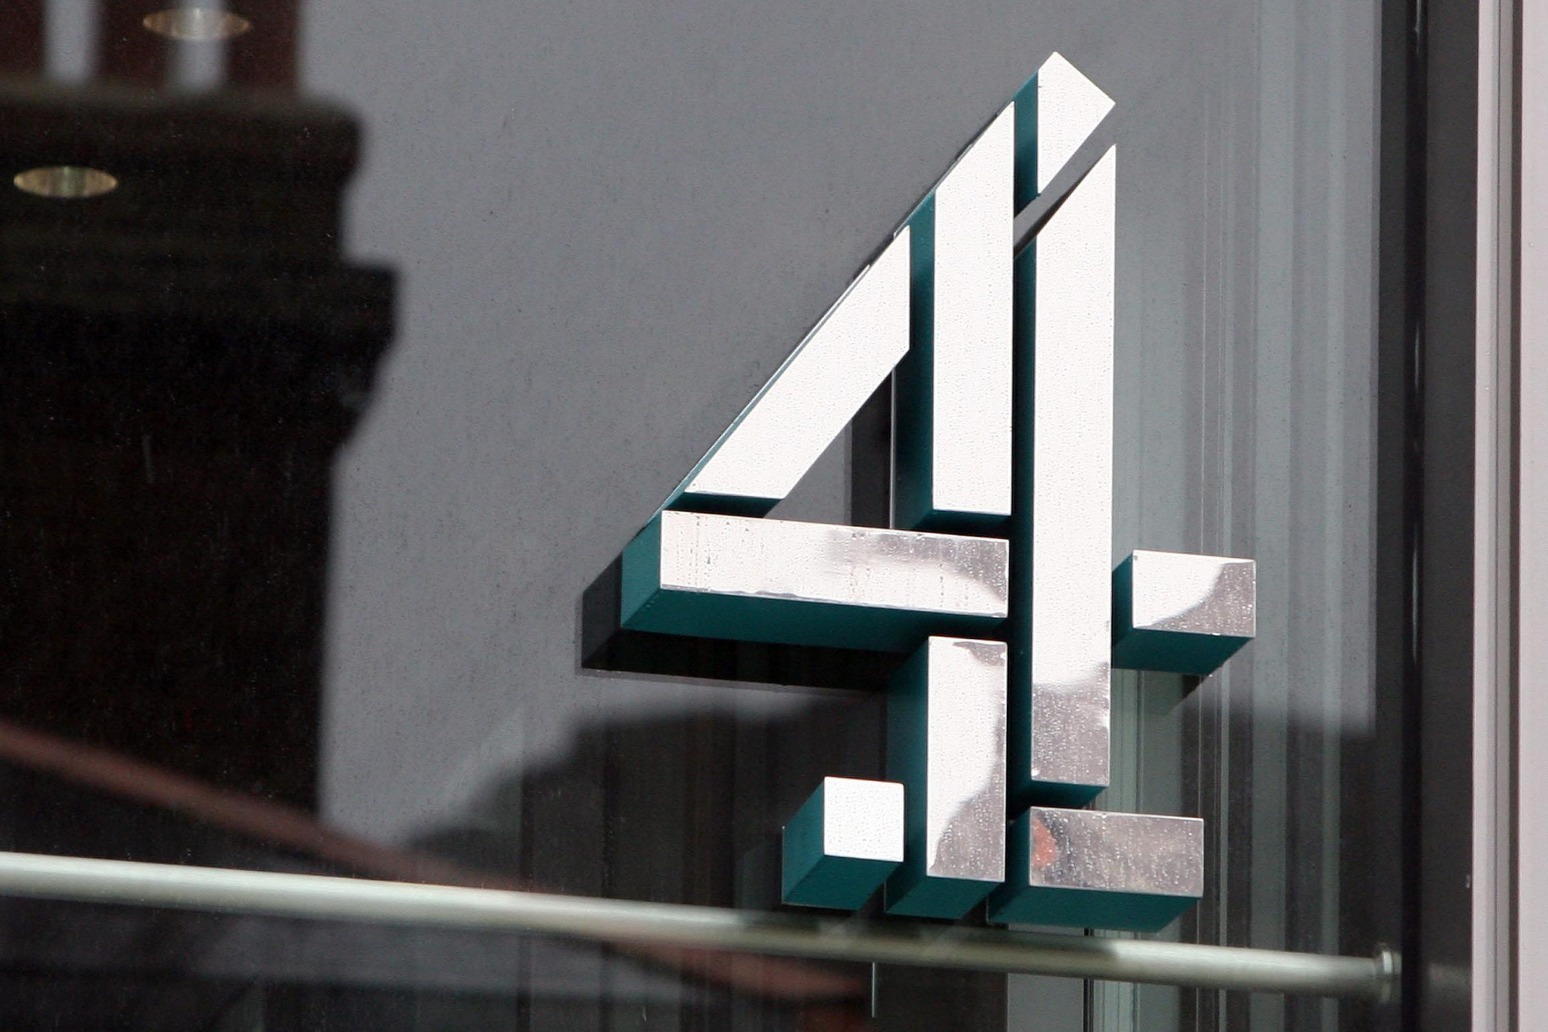 UK producers urge new prime minister to reconsider Channel 4 privatisation 